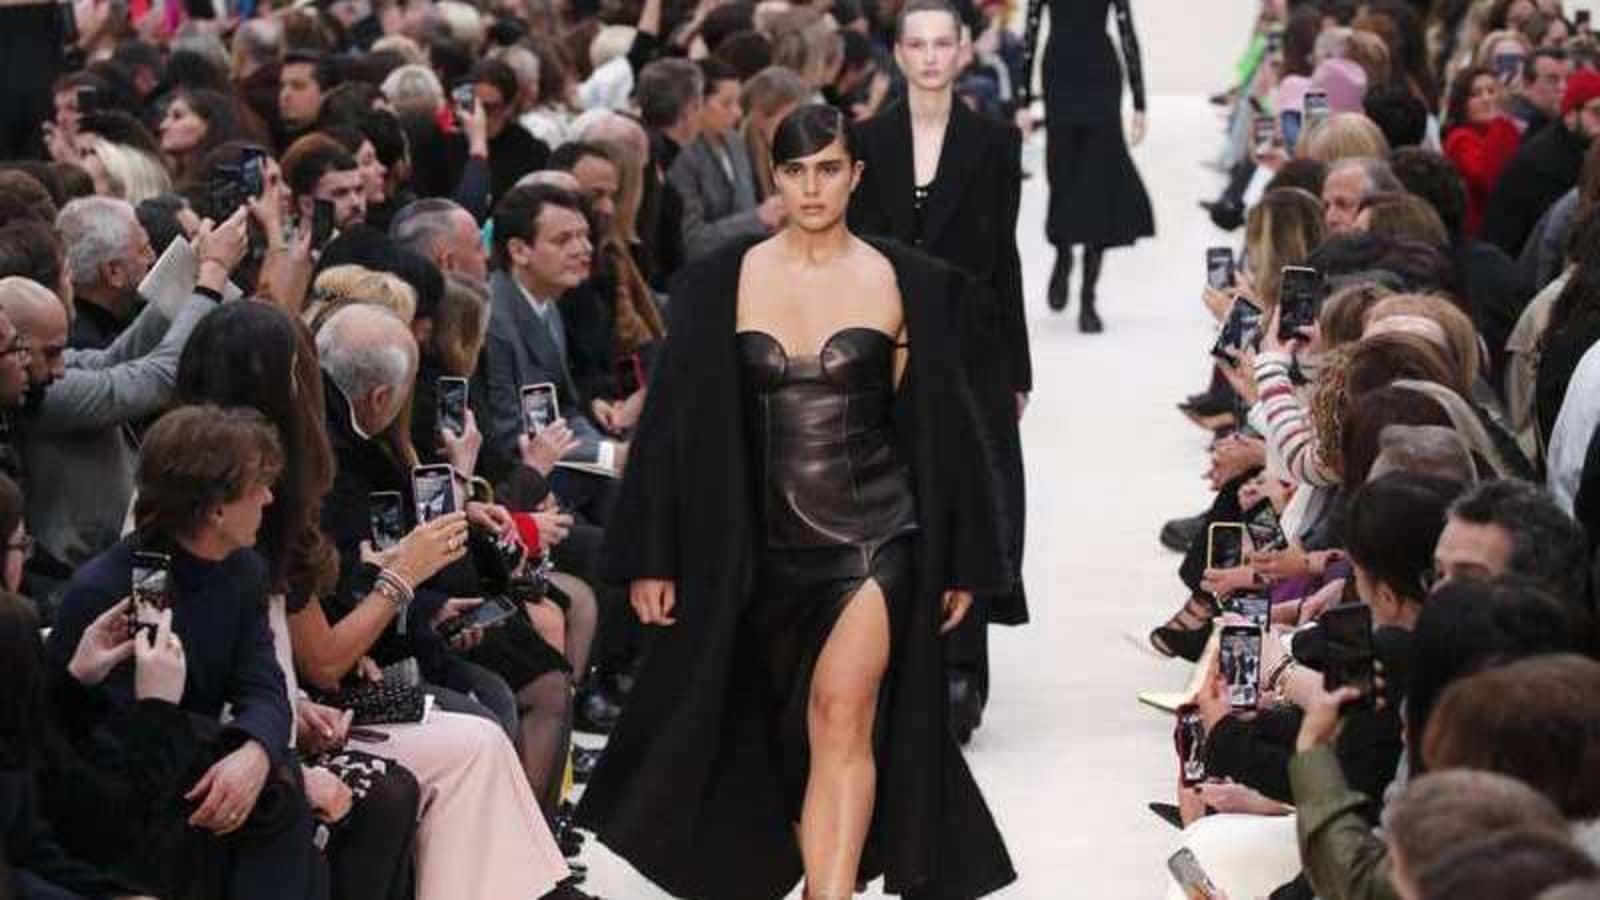 This month's Paris Fashion Week goes totally digital | Fashion Trends ...